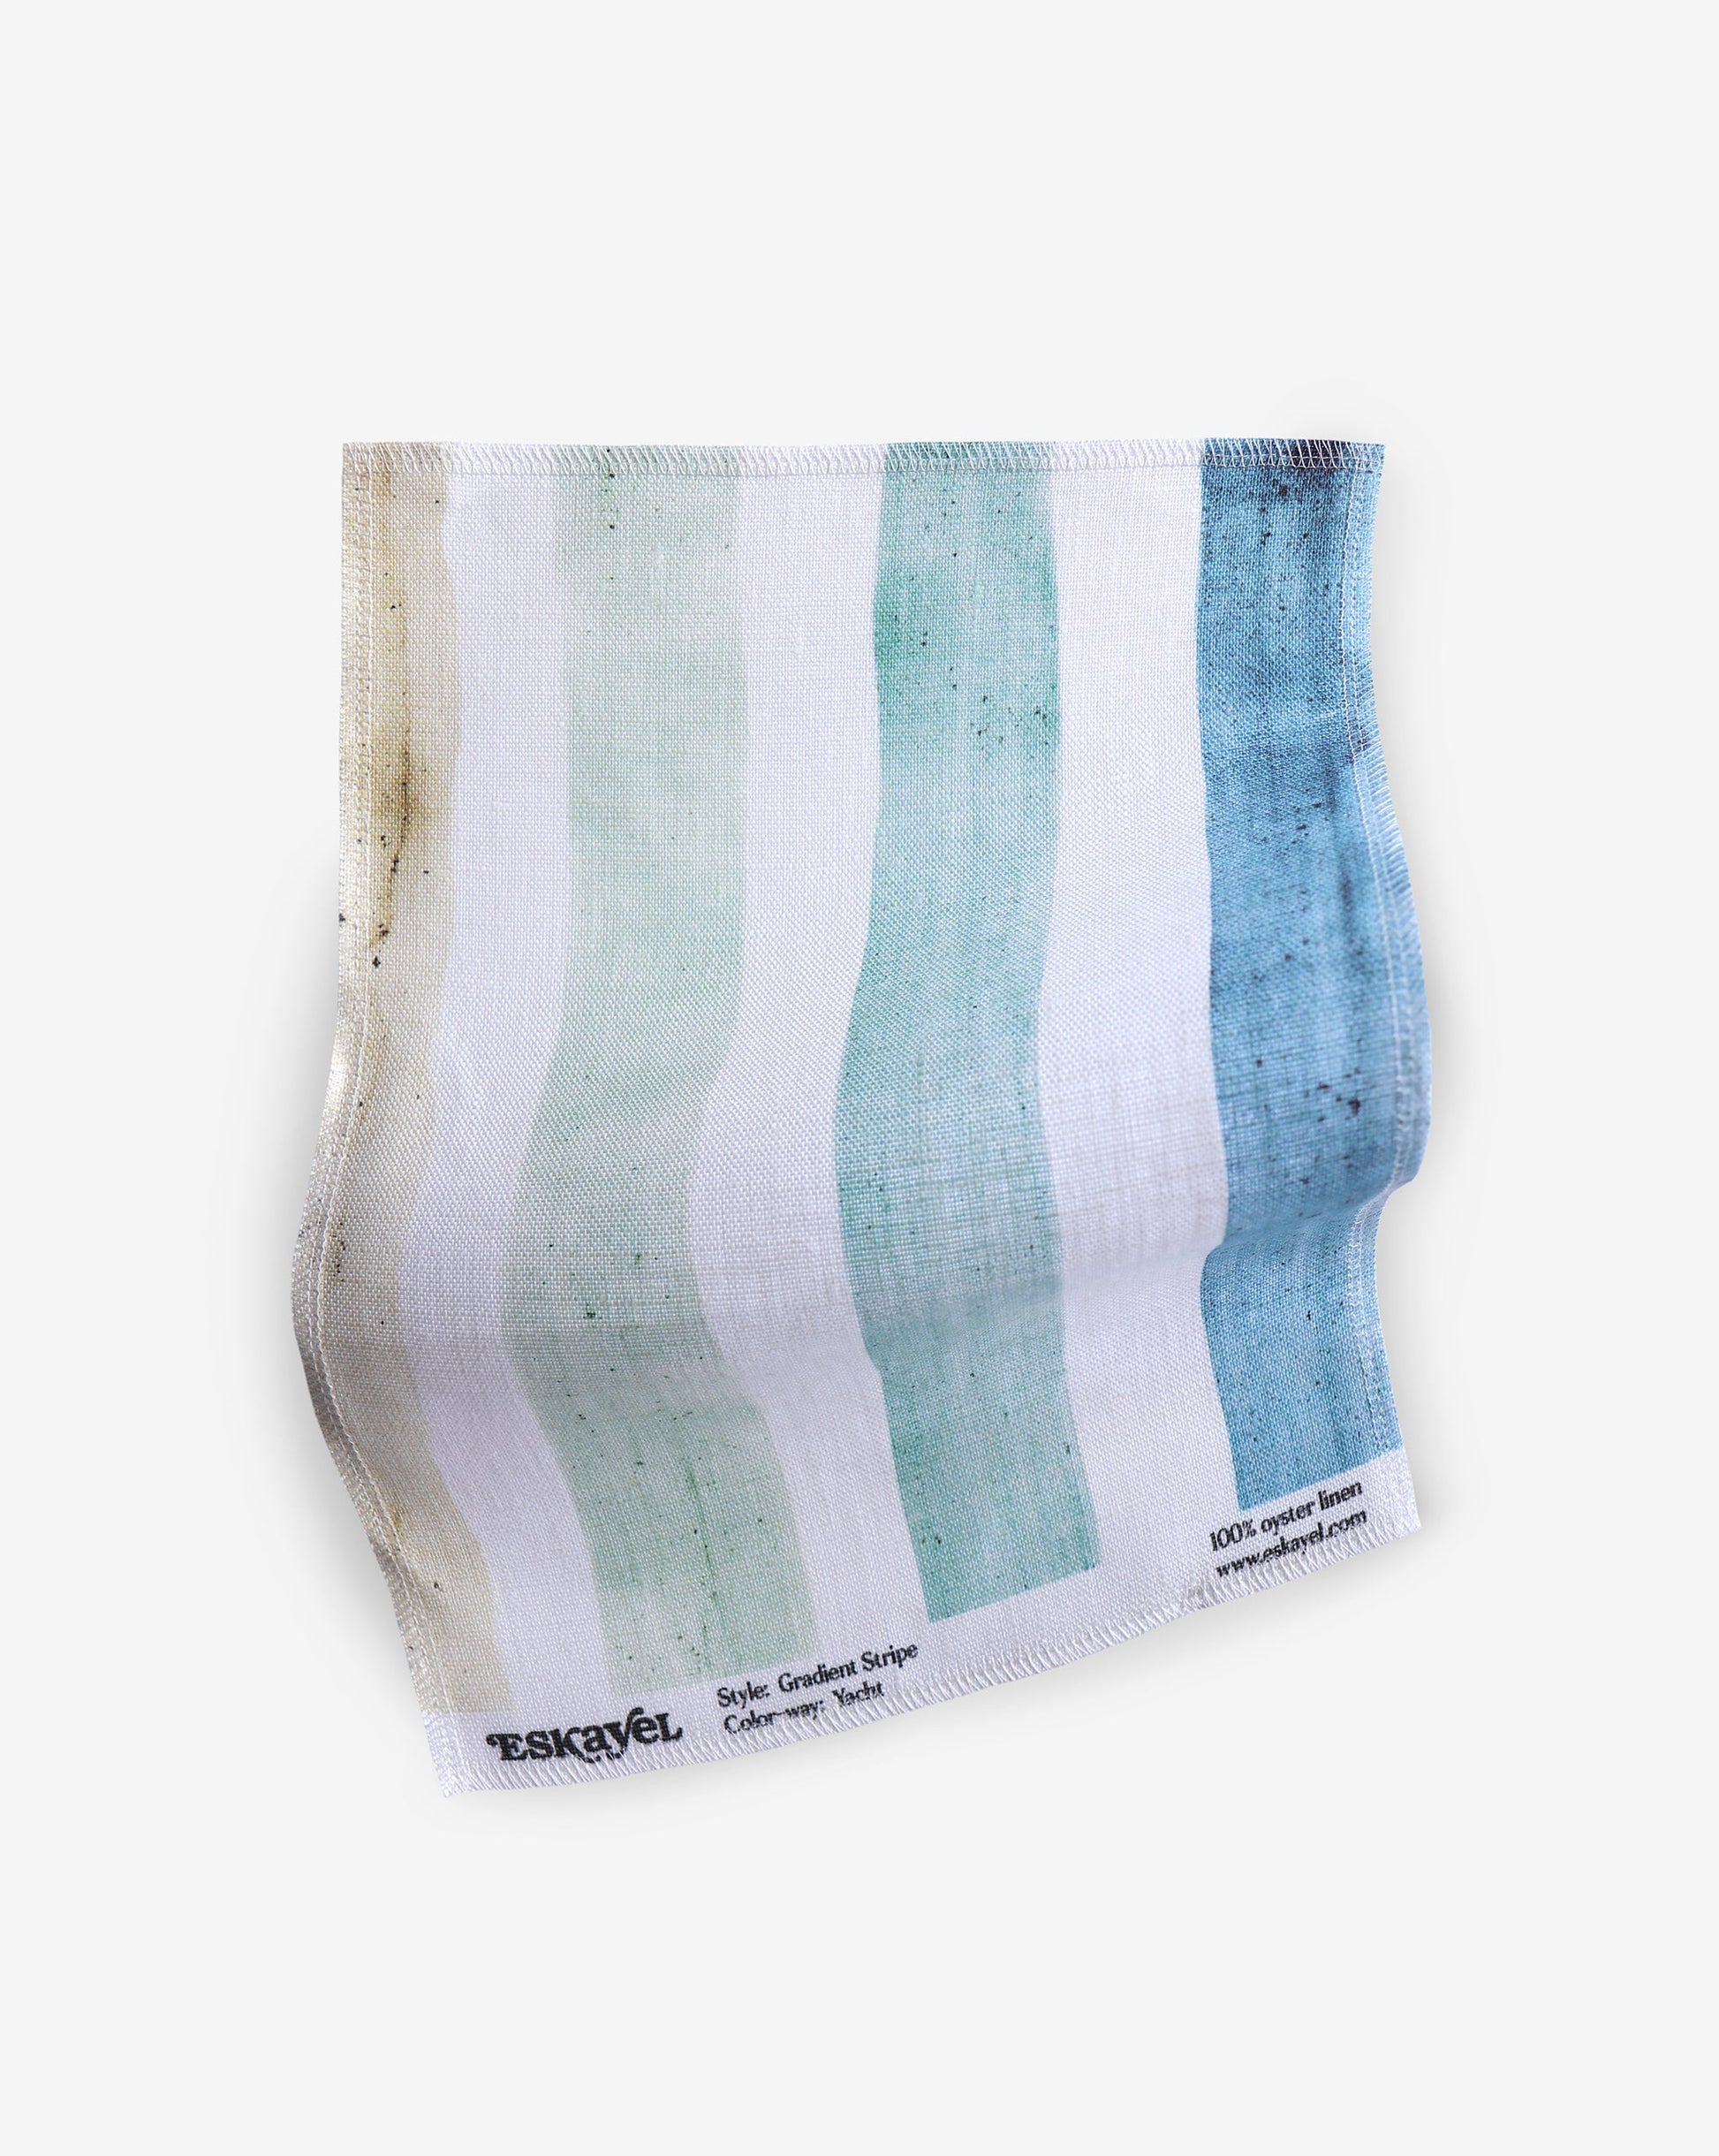 A Gradient Stripe Fabric||Yacht tea towel with blue and green gradient stripes.